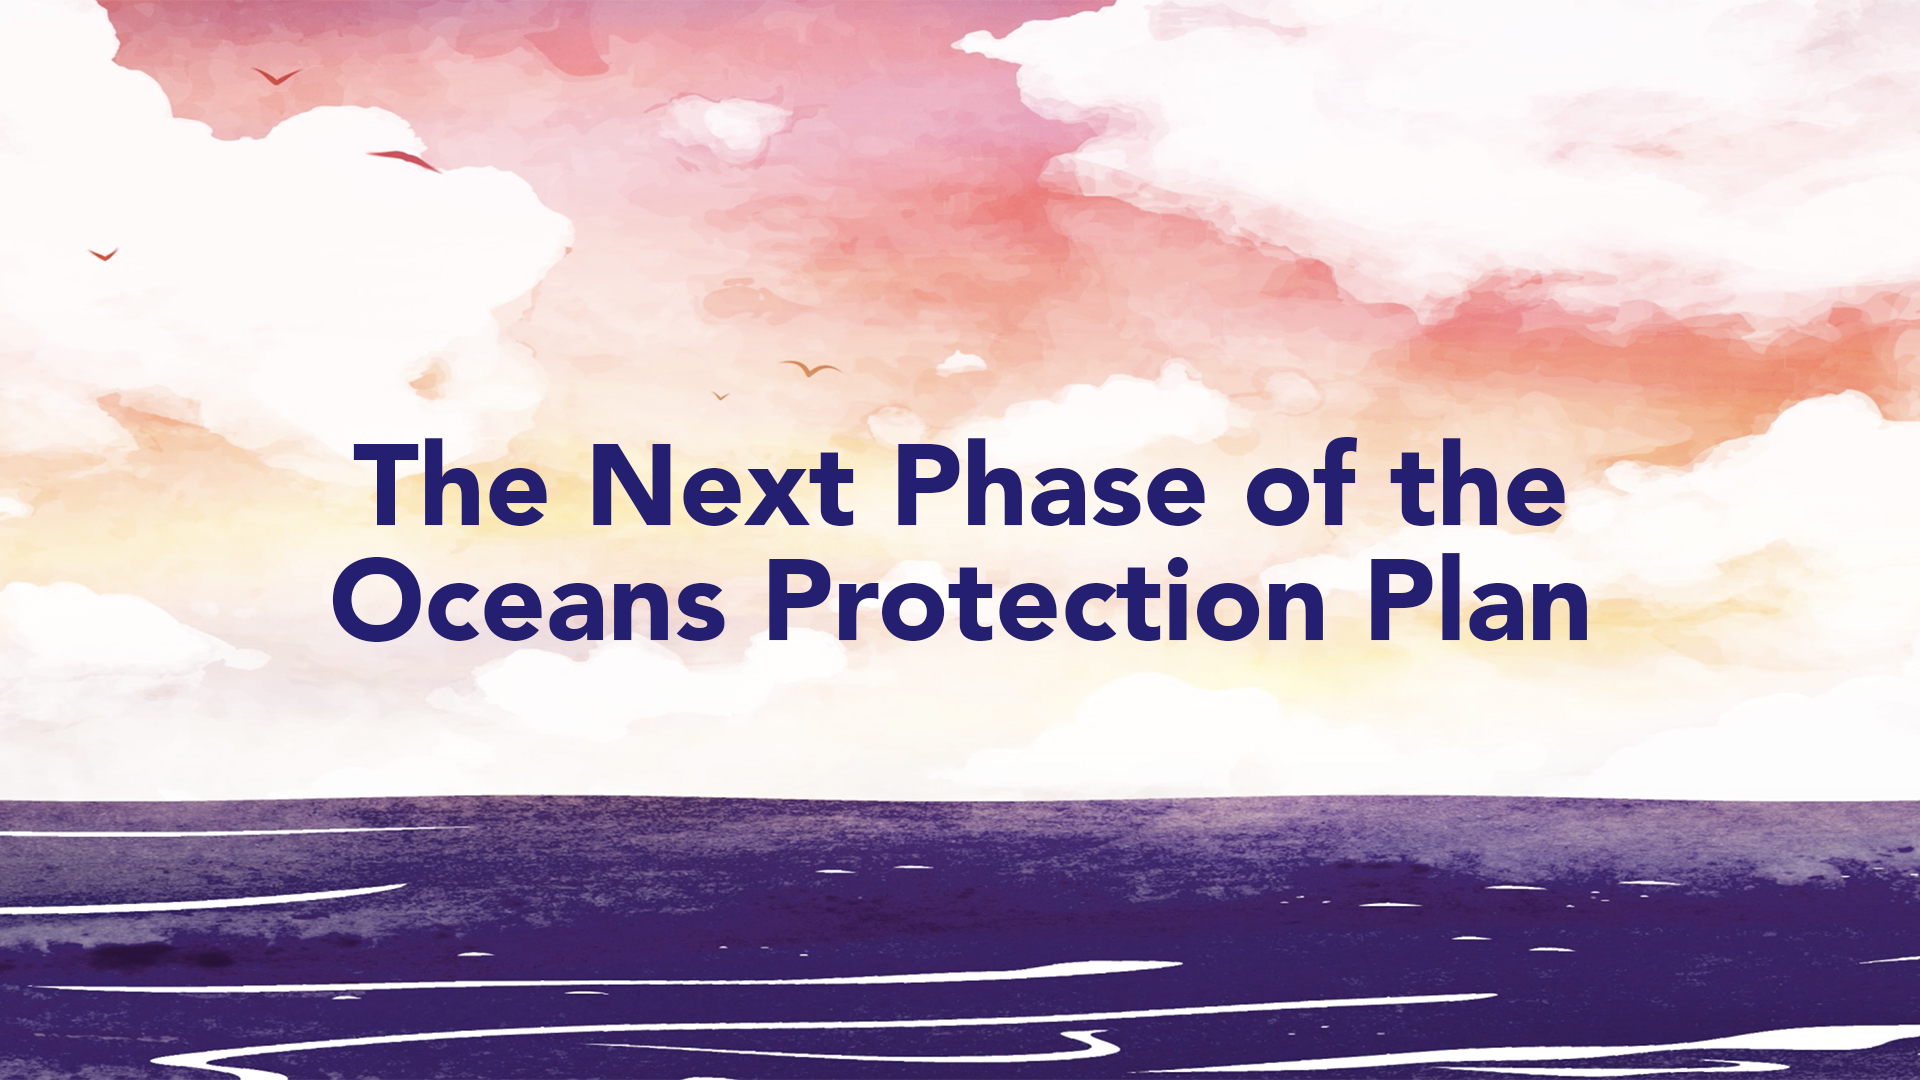 The Next Phase of the Oceans Protection Plan